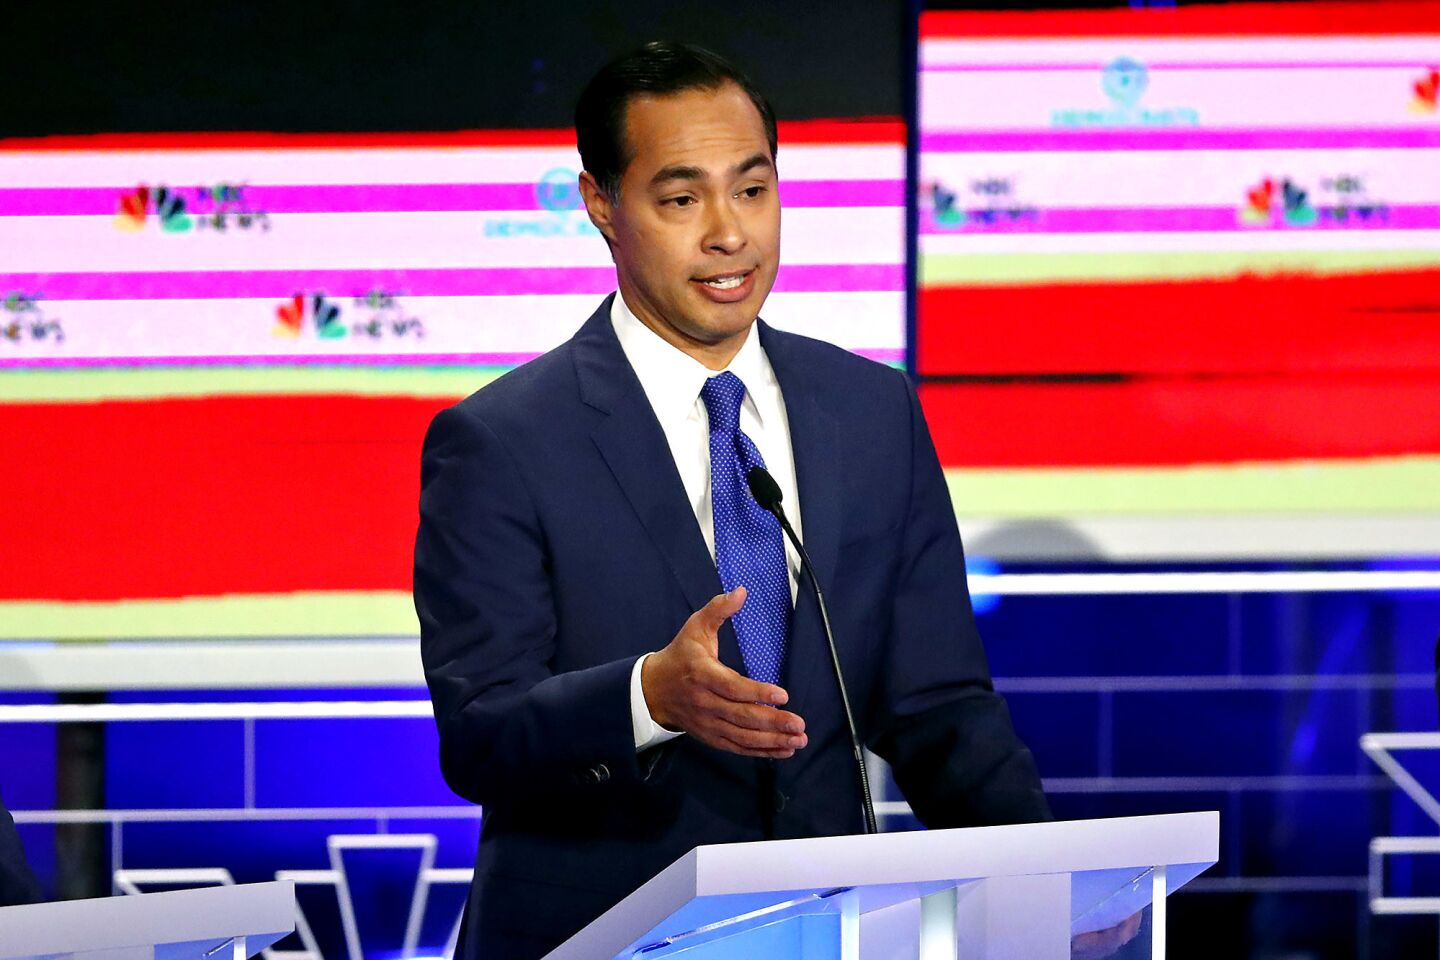 Democratic presidential candidate former Housing and Urban Development Secretary Julian Castro speaks during a Democratic primary debate hosted by NBC News at the Adrienne Arsht Center for the Performing Art, Wednesday, June 26, 2019, in Miami.